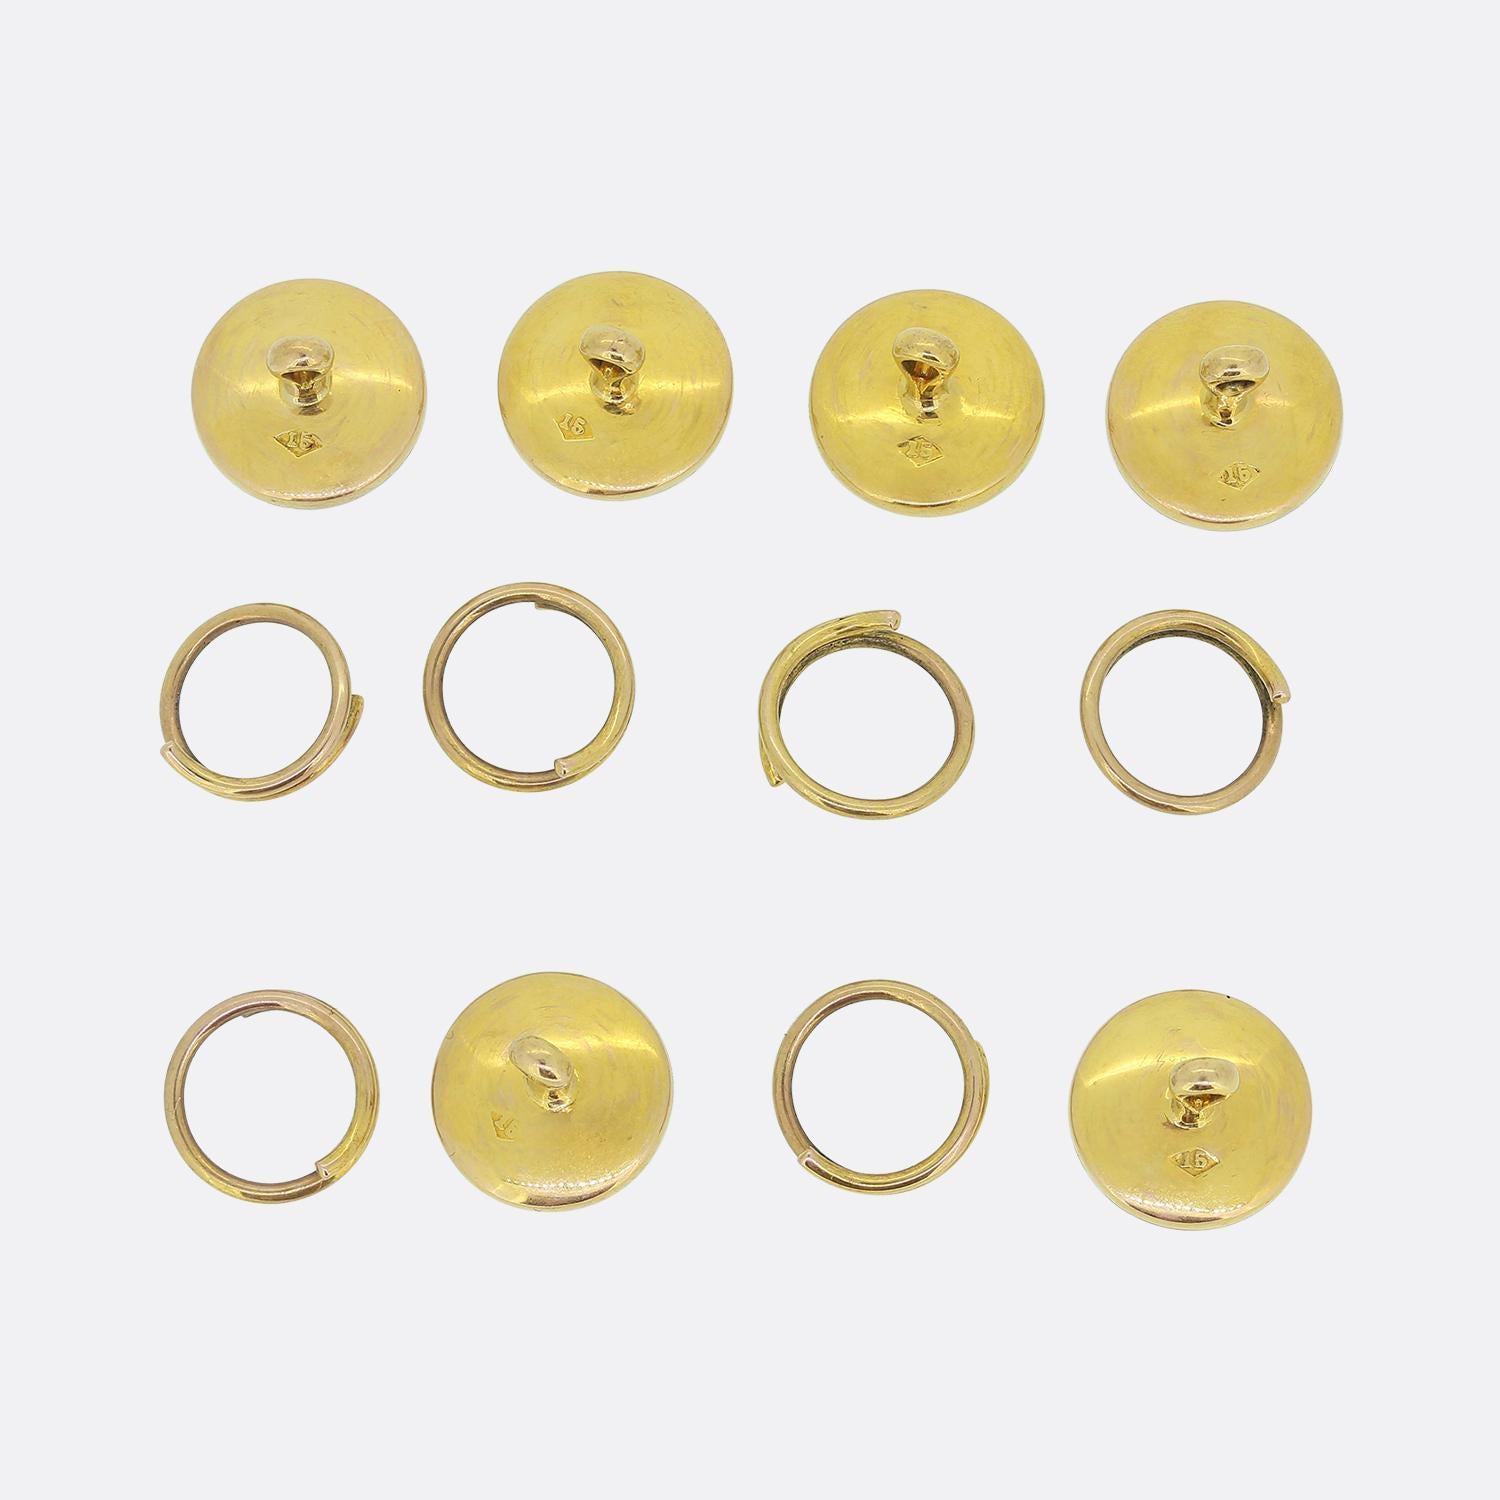 Here we have a handsome gent’s dress stud set comprised of six 13mm diameter mother-of-pearl discs; each set with a single roped cross section at the centre within a warm 15ct yellow gold surround upon matching polished backs. This extremely dapper